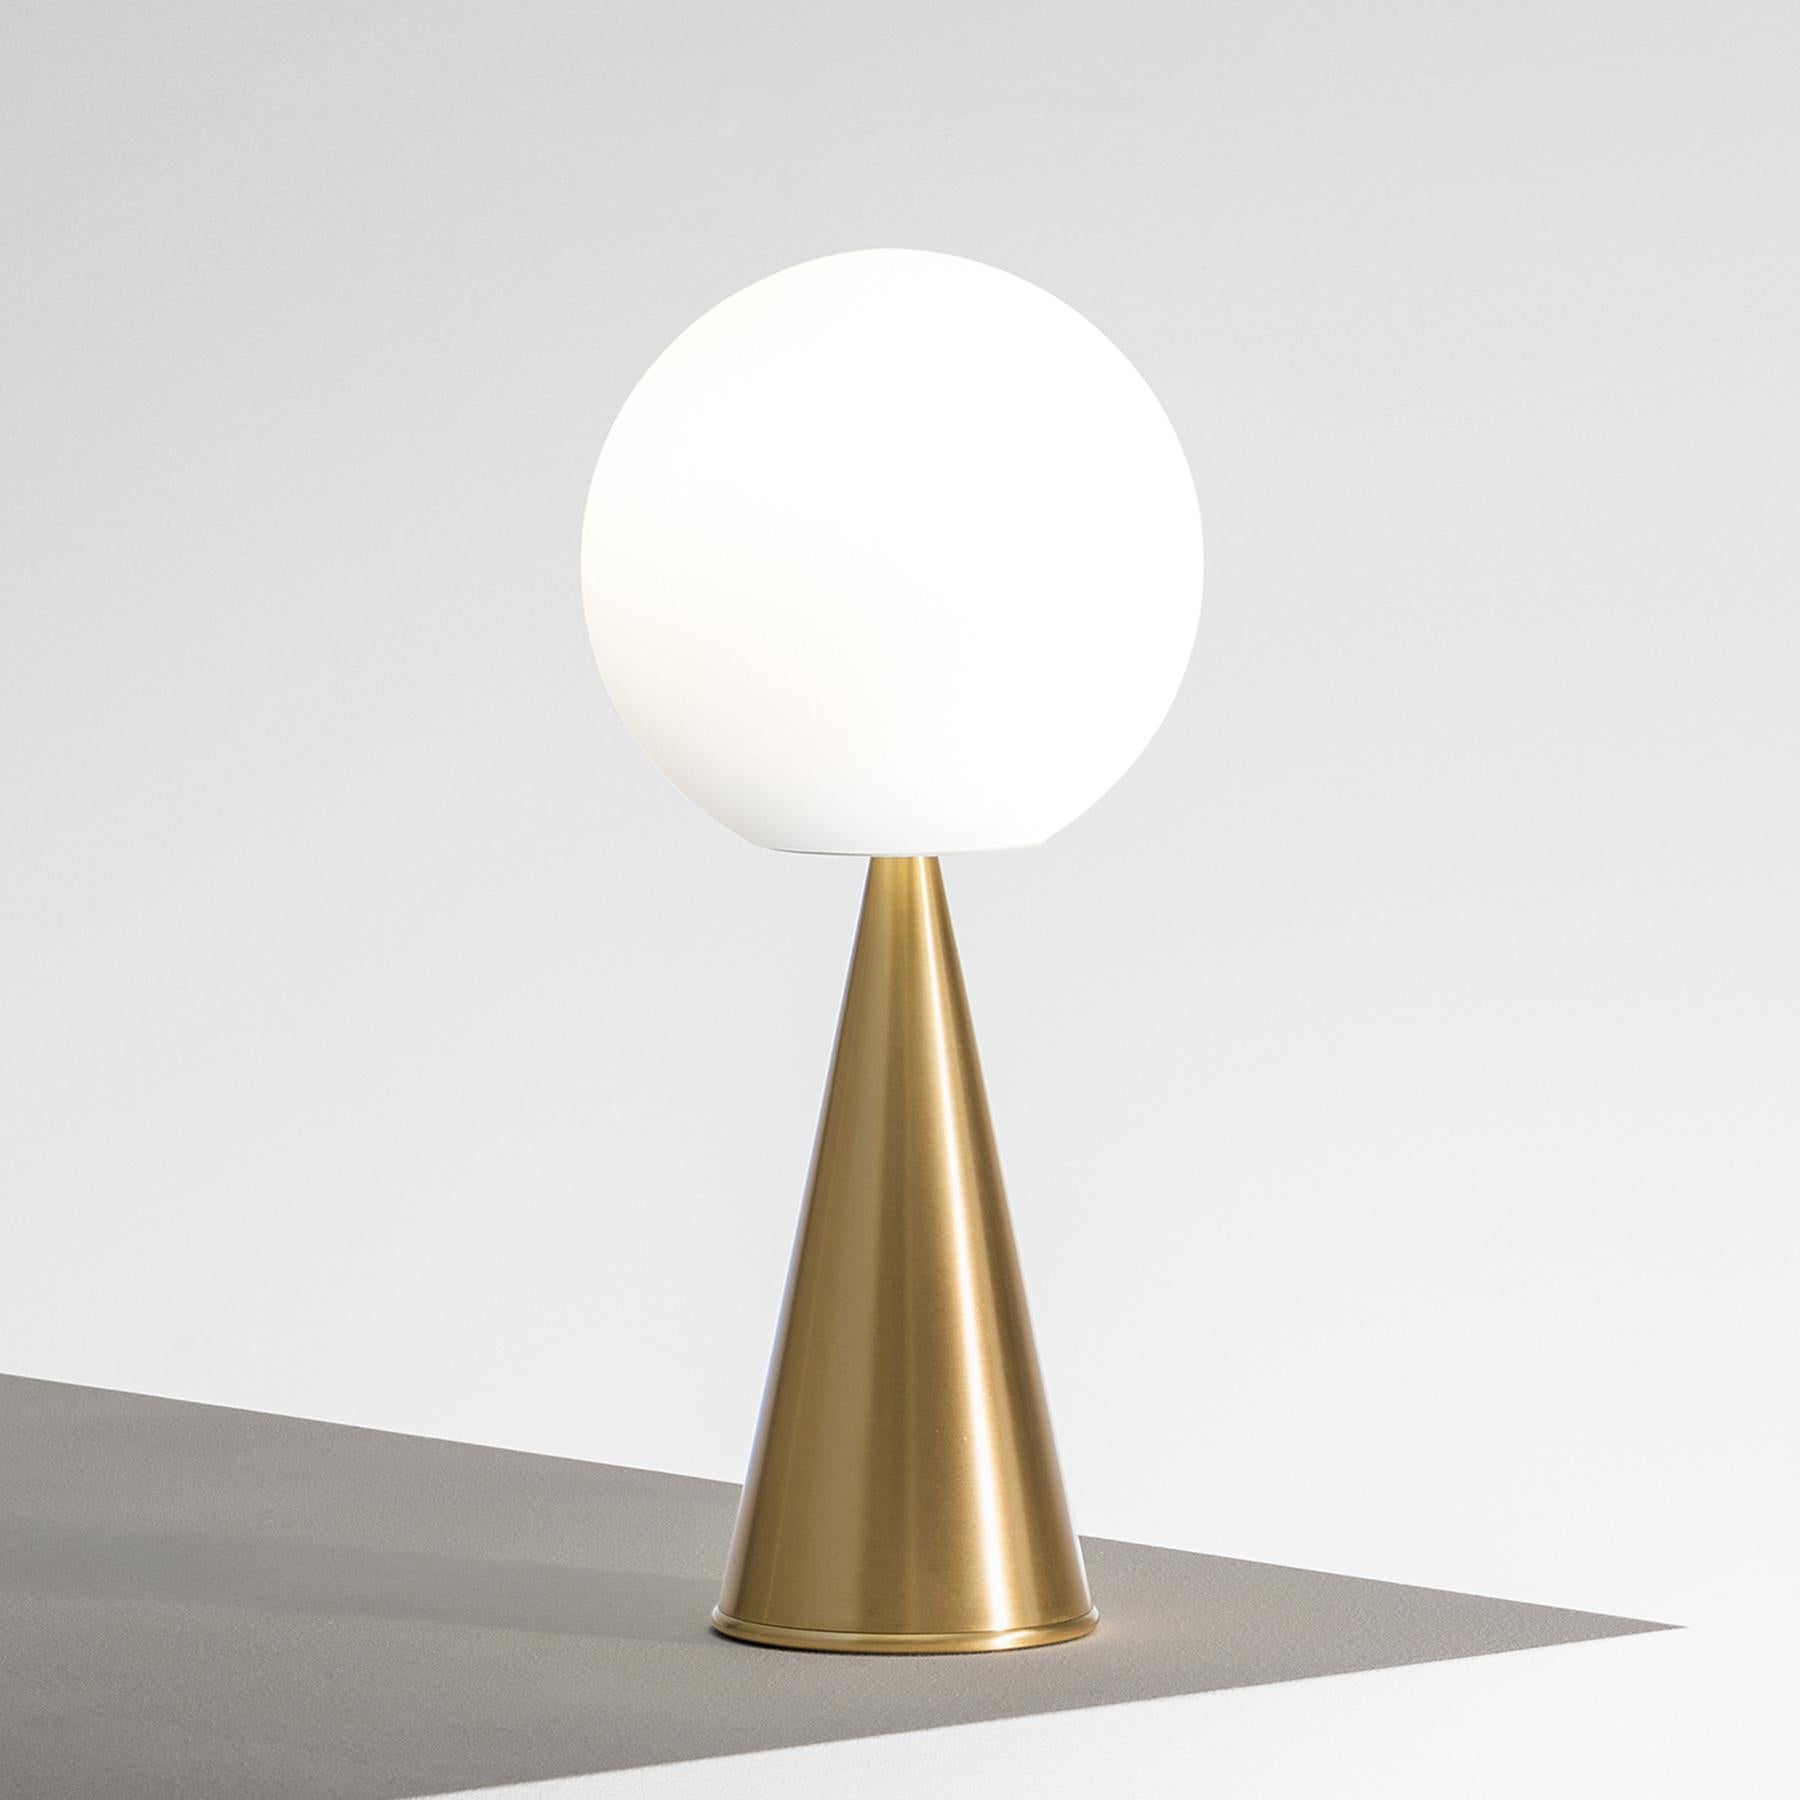 Table lamp full moon with metal base in brass finish
and with white glass full moon shade. 1 bulb, lamp holder
type E14, max 46 watt. Or led bulb type E14, max 6 watt.
Bulb not included.
Also available with metal base in nickel finish.